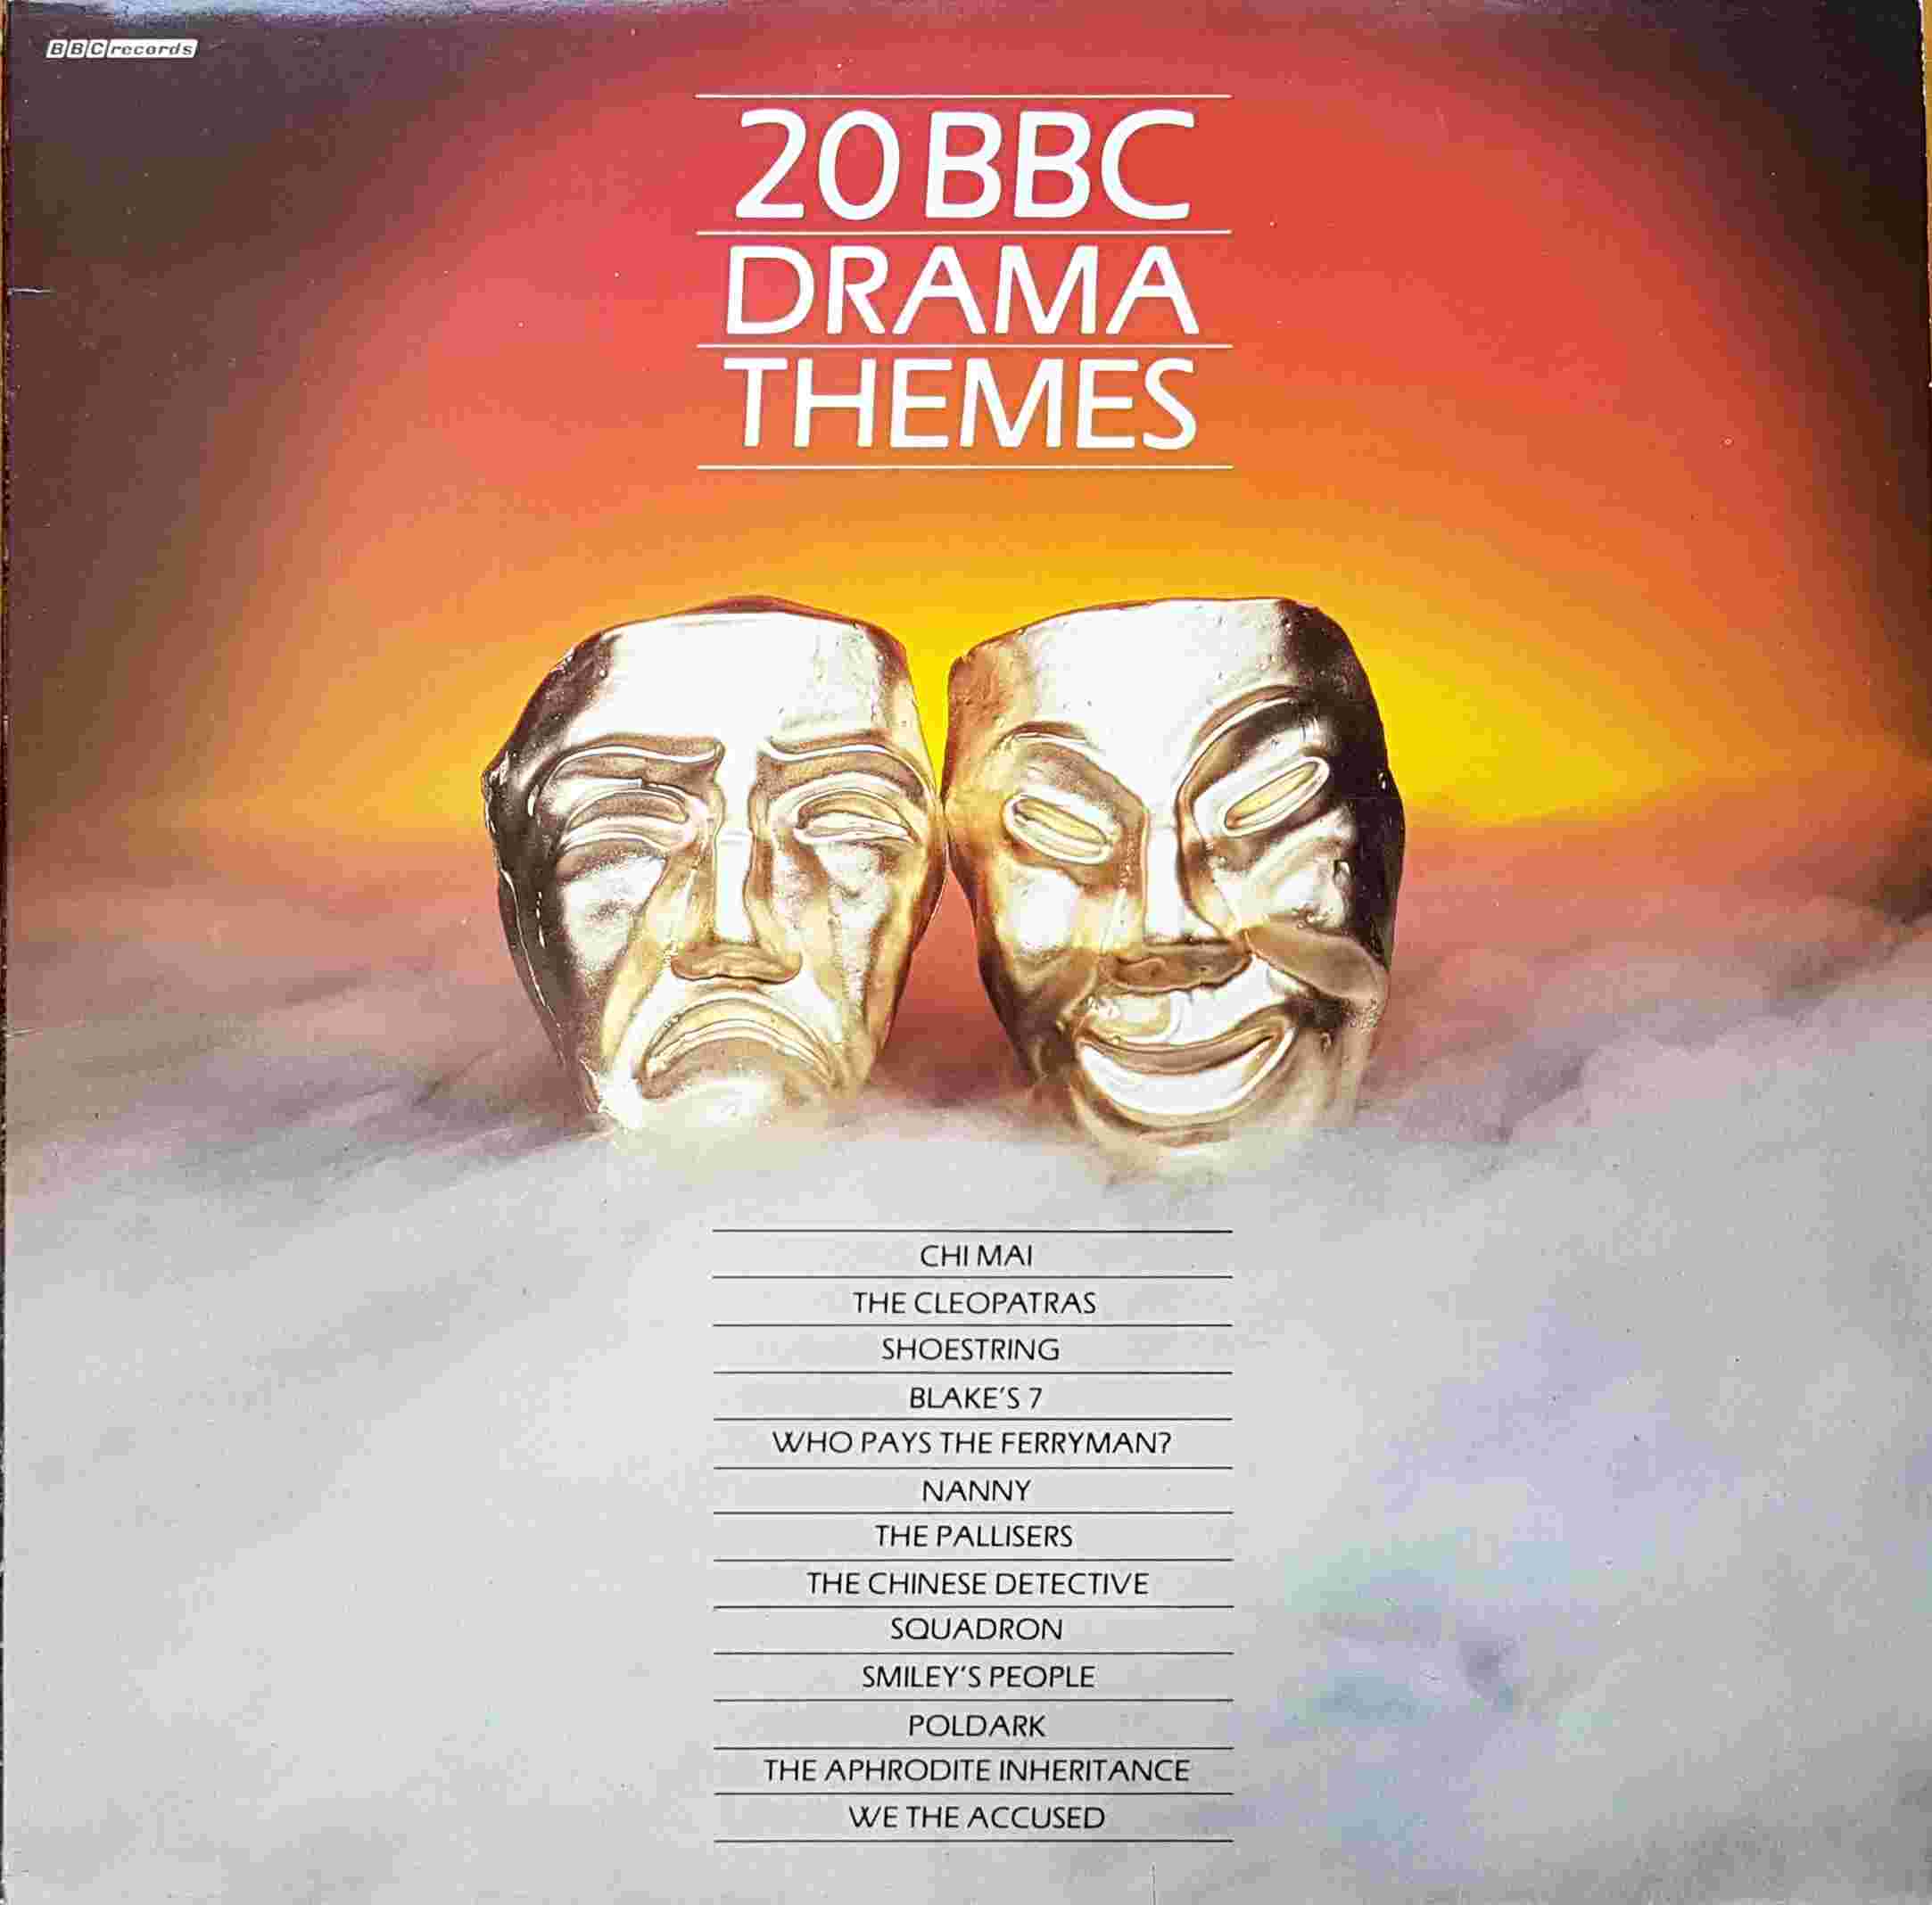 Picture of REH 464 20 BBC drama themes by artist Various from the BBC albums - Records and Tapes library